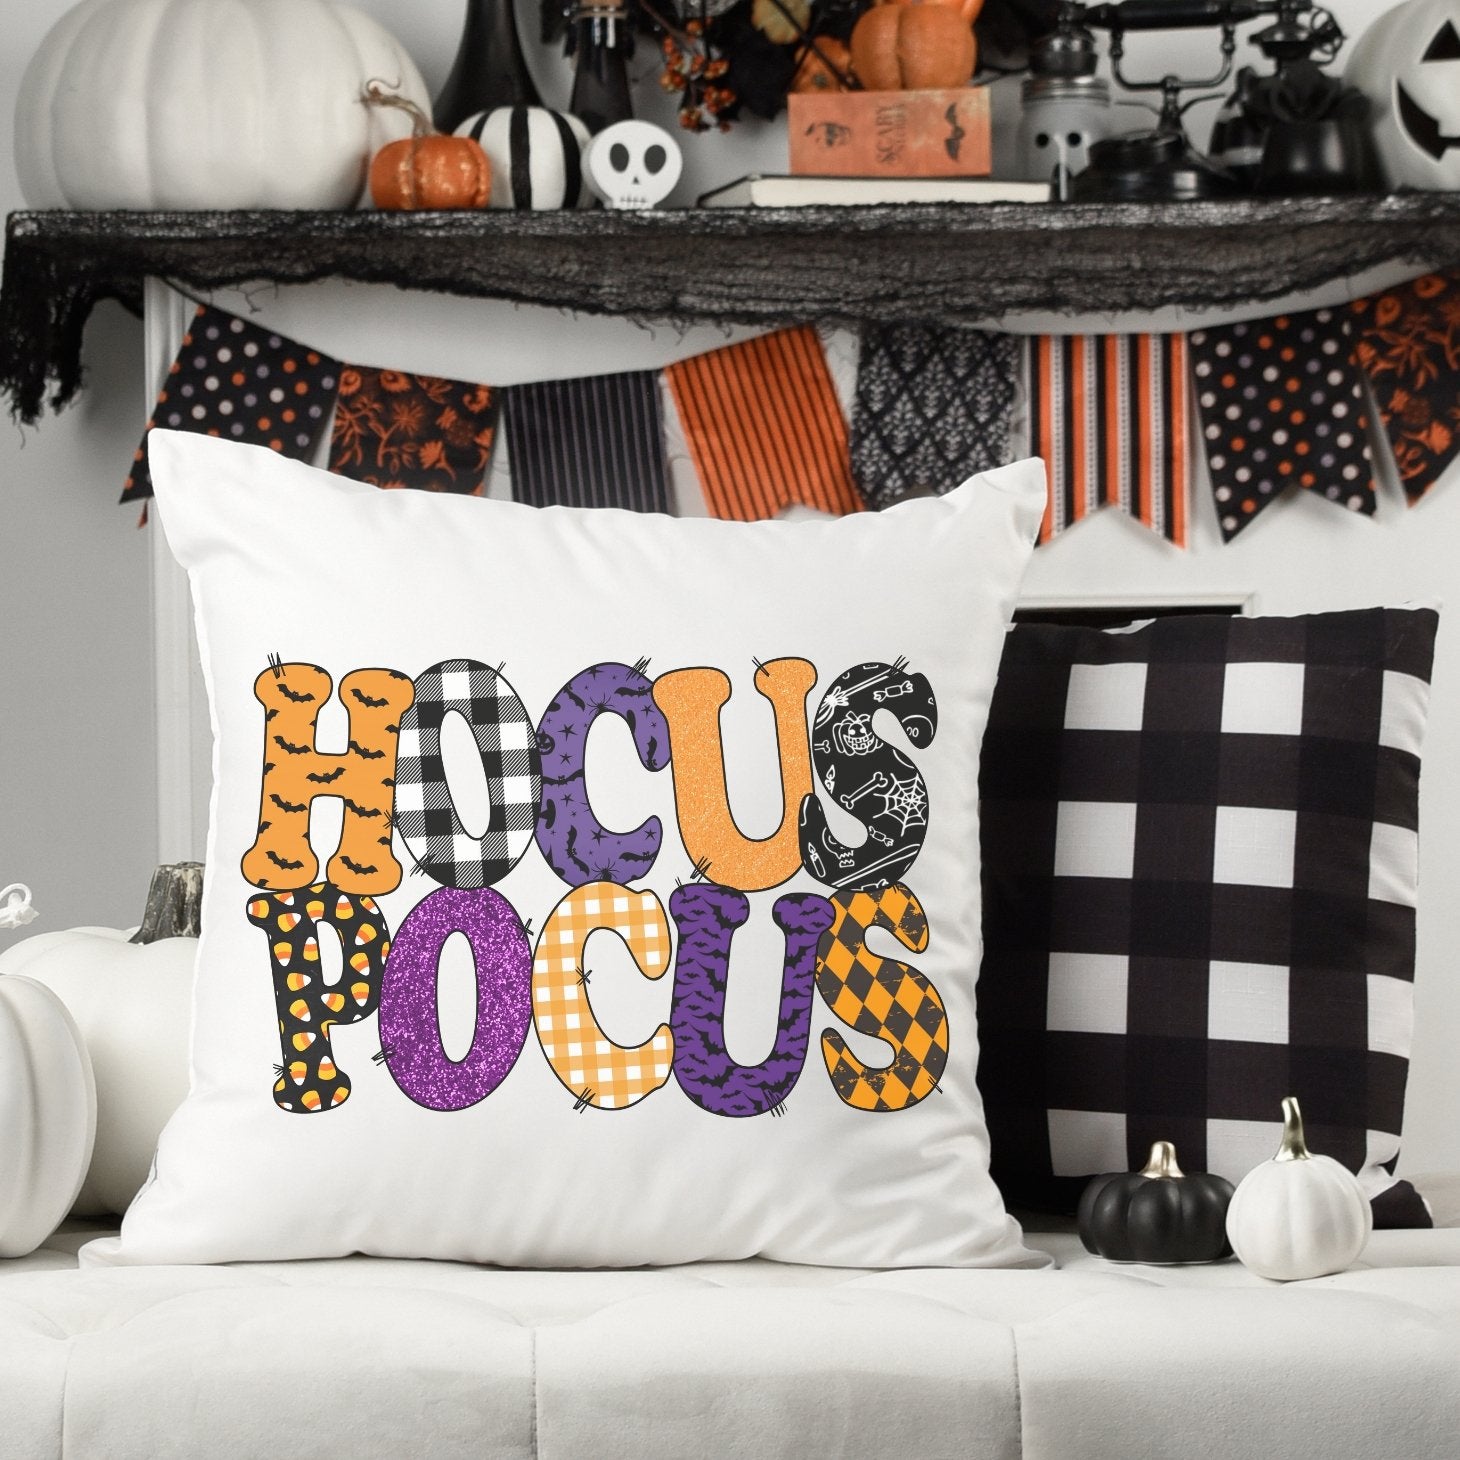 Hocus Pocus Colorful Sublimated Pillow Cover - Trendznmore